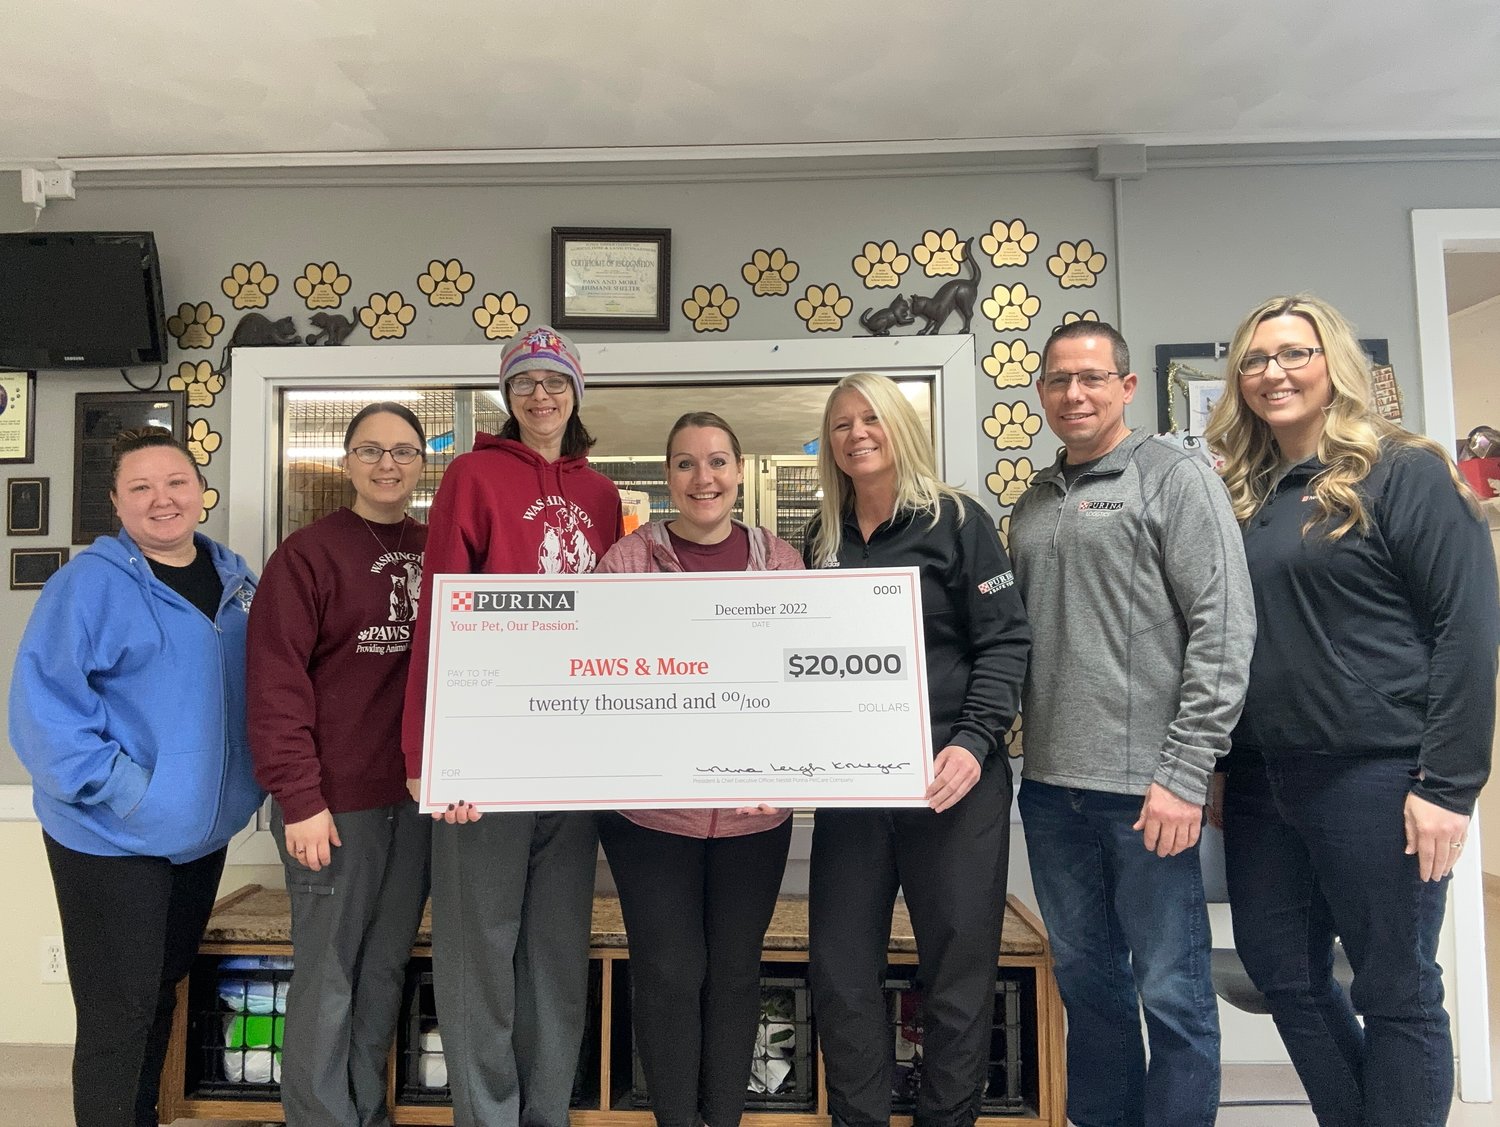 The Nestle Purina PetCare team (on right) presented the PAWS & More team (on left) with $20,000 toward construction of a new animal shelter building.